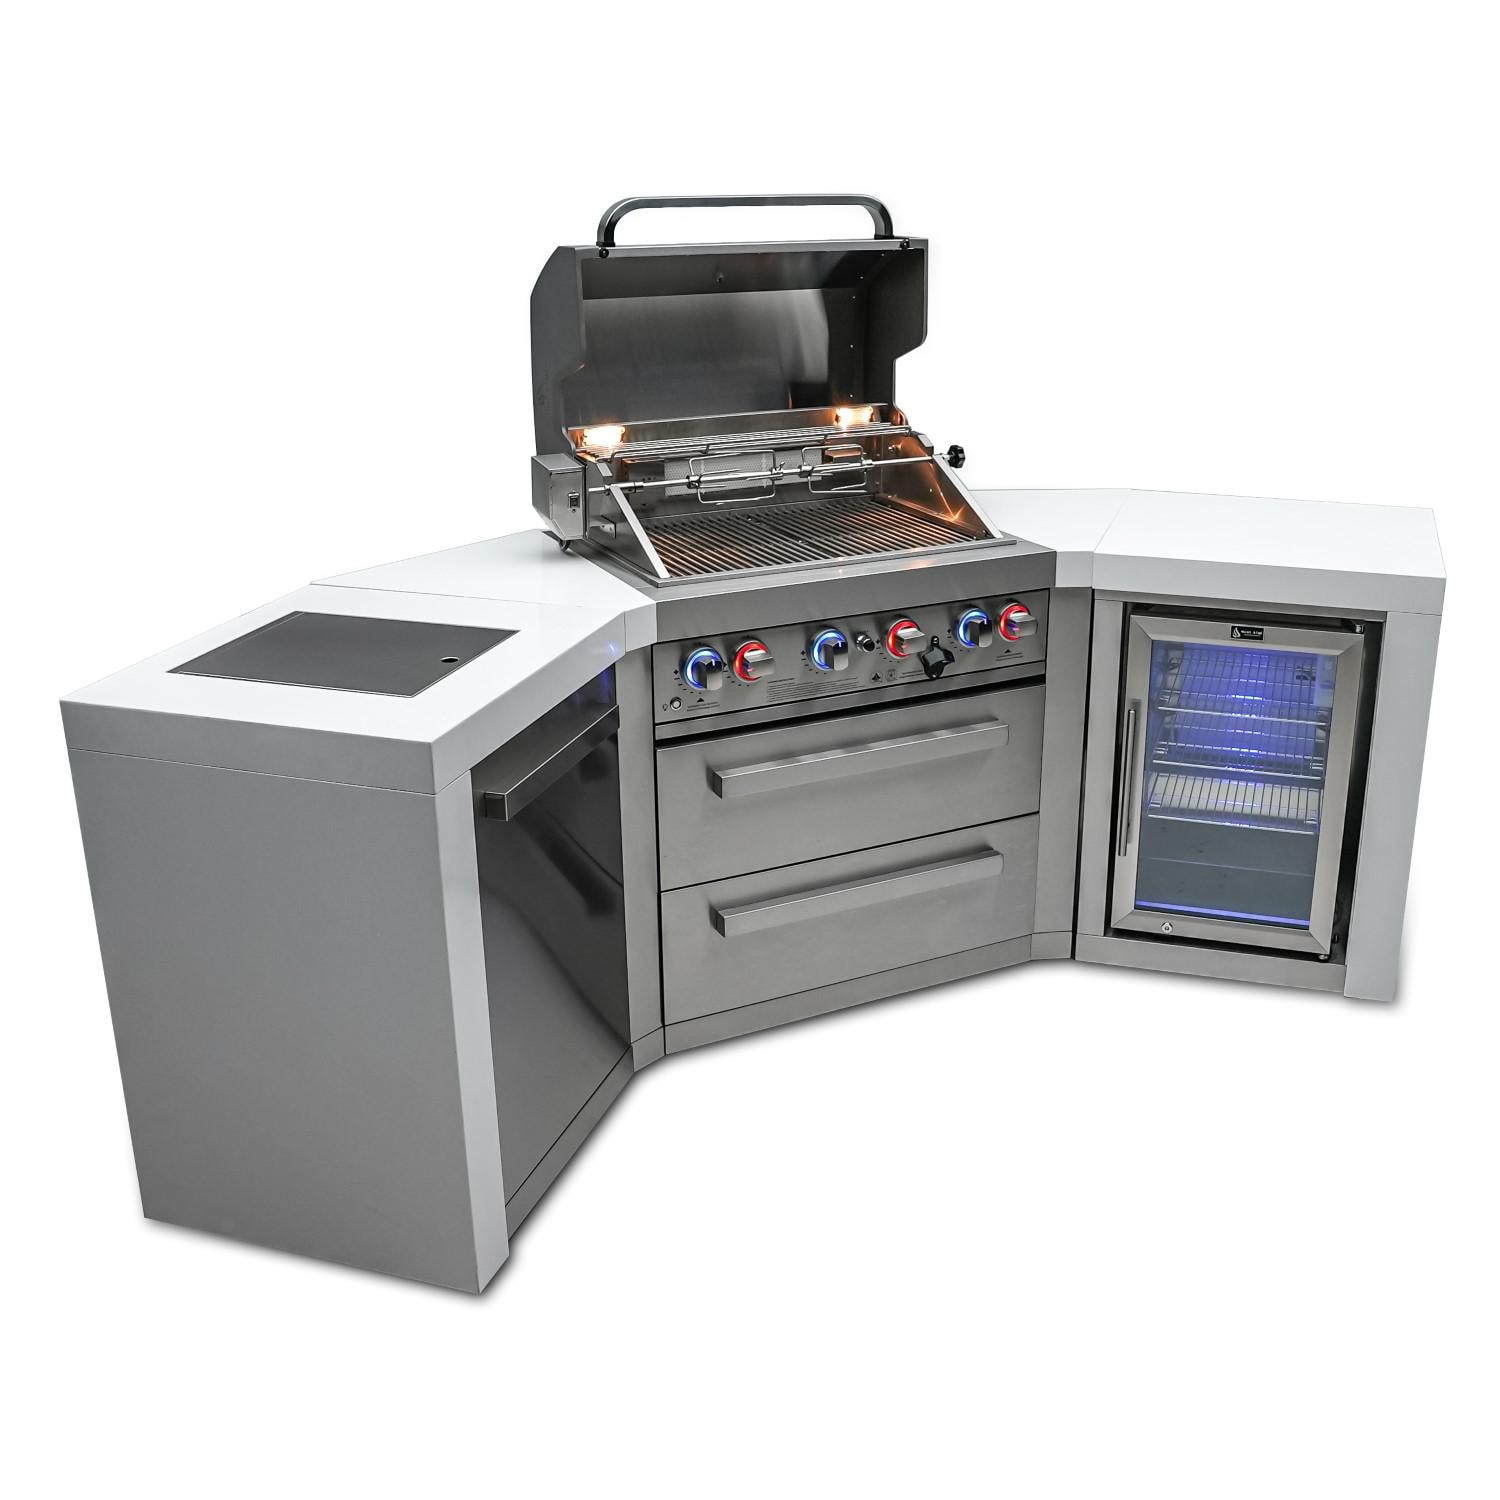 Mont Alpi 400 Deluxe 45 Degree Propane Gas Island Grill W/ Refrigerator Cabinet, Infrared Side Burner, & Rotisserie Kit - MAi400-D45FC - image 2 of 6